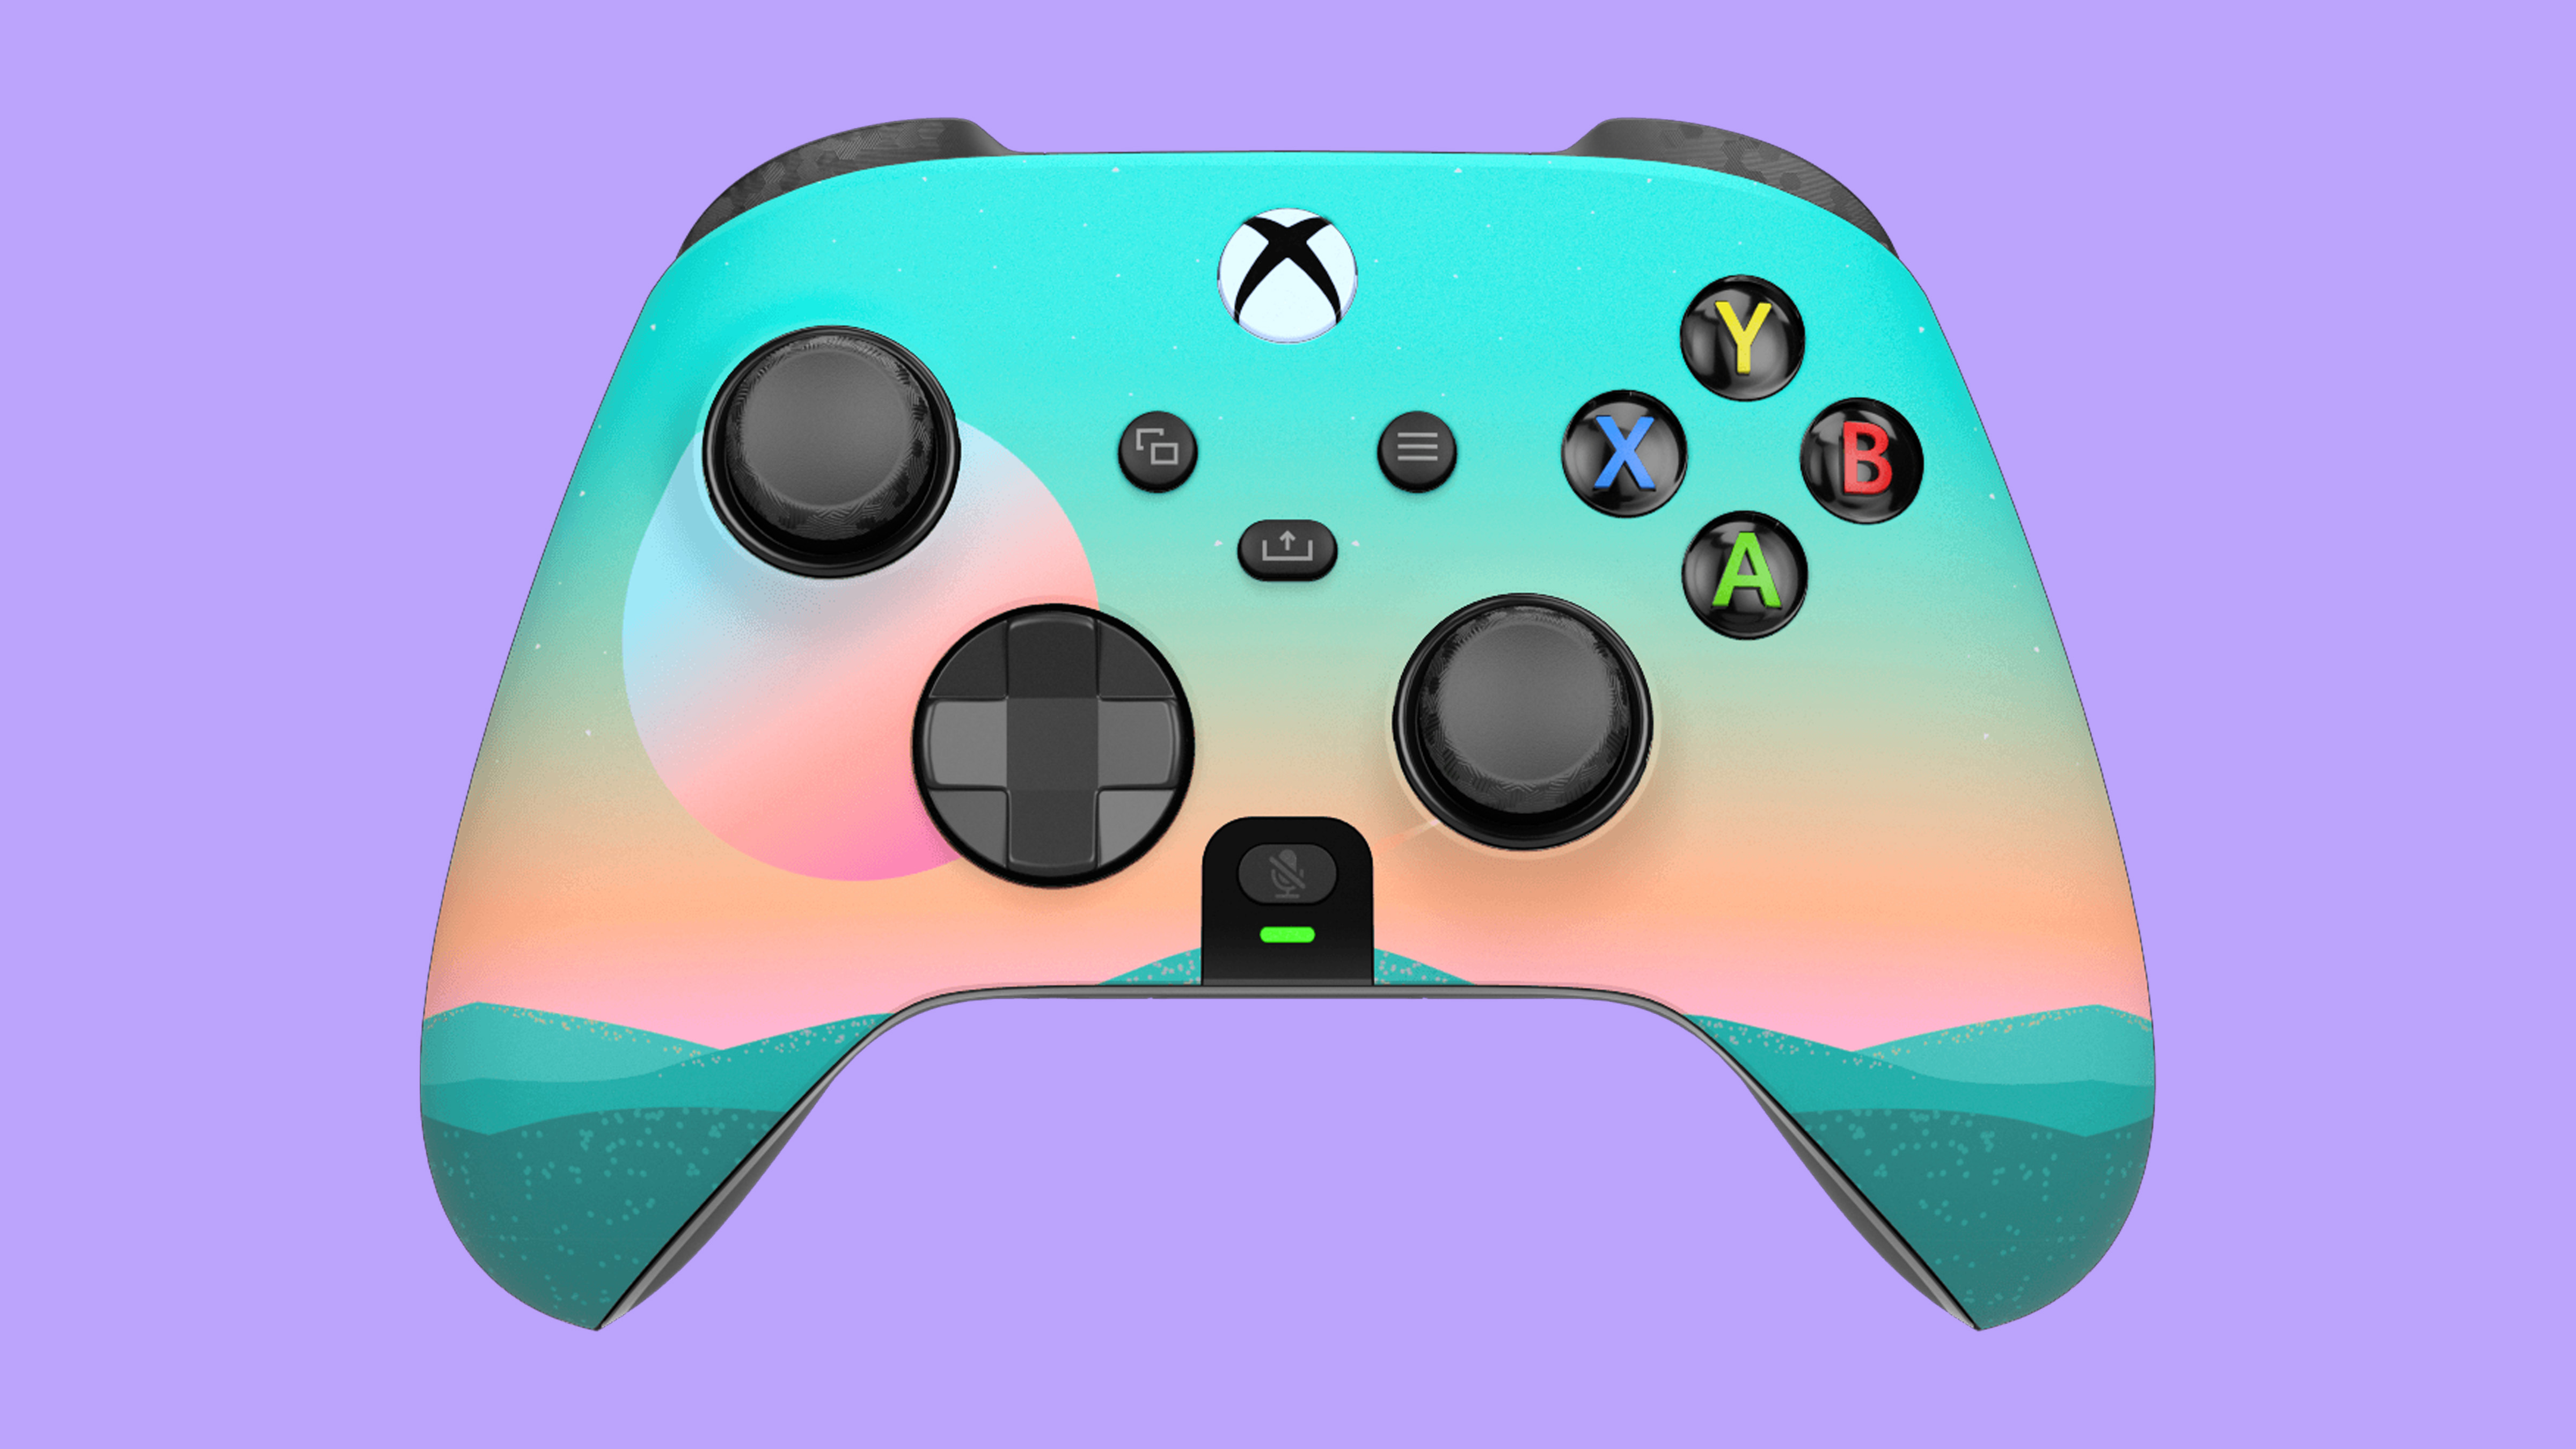 Scuf Impact or Instinct Pro Gaming Controller against a periwinkle background